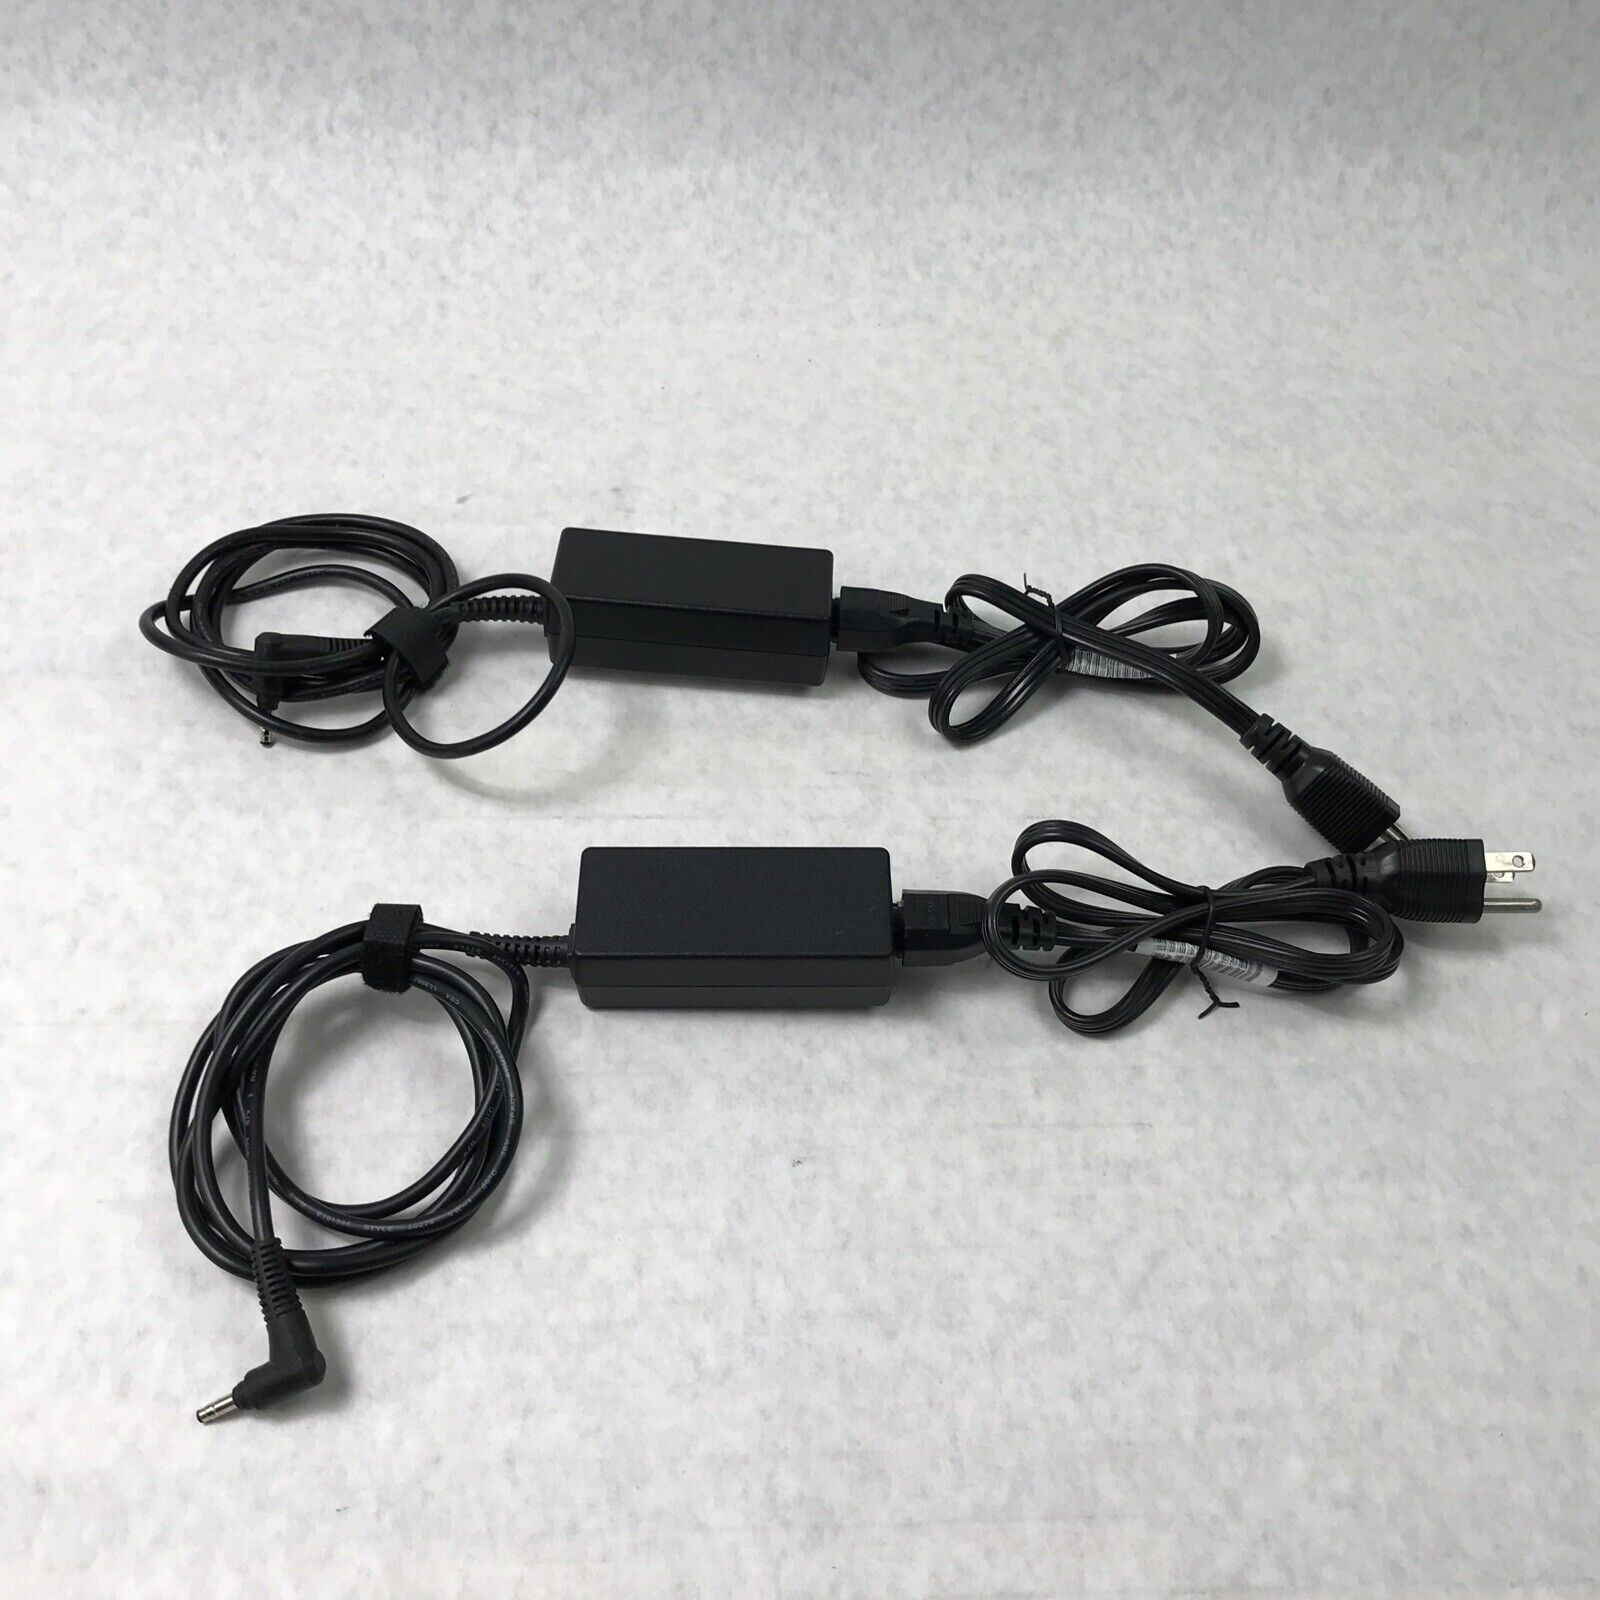 (Lot of 2) HP HSTNN-CA189 Laptop Charger 60Hz 19.5V 40W 2.05A  622435-002